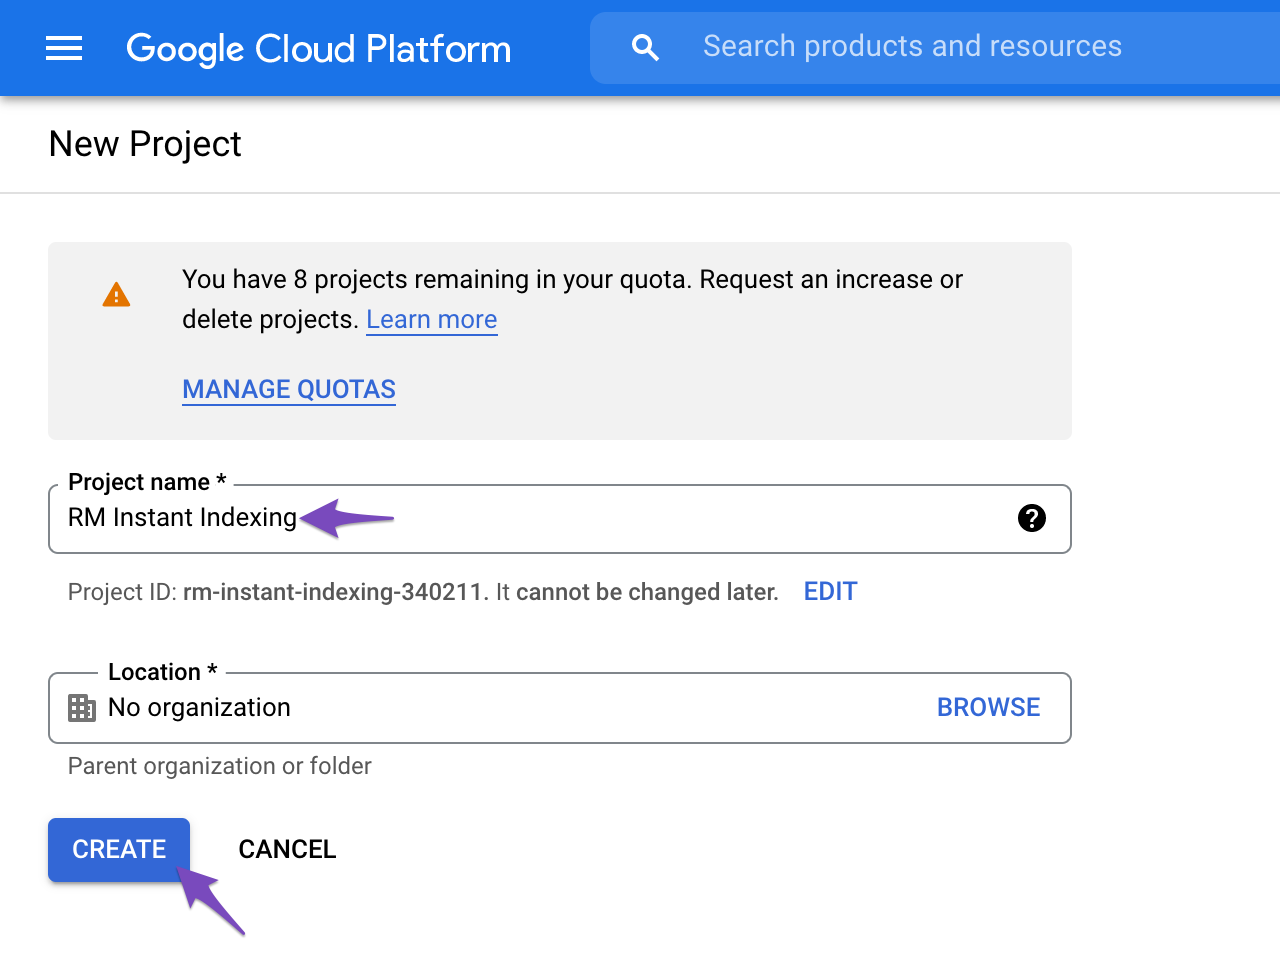 Name Your New Google Cloud Project